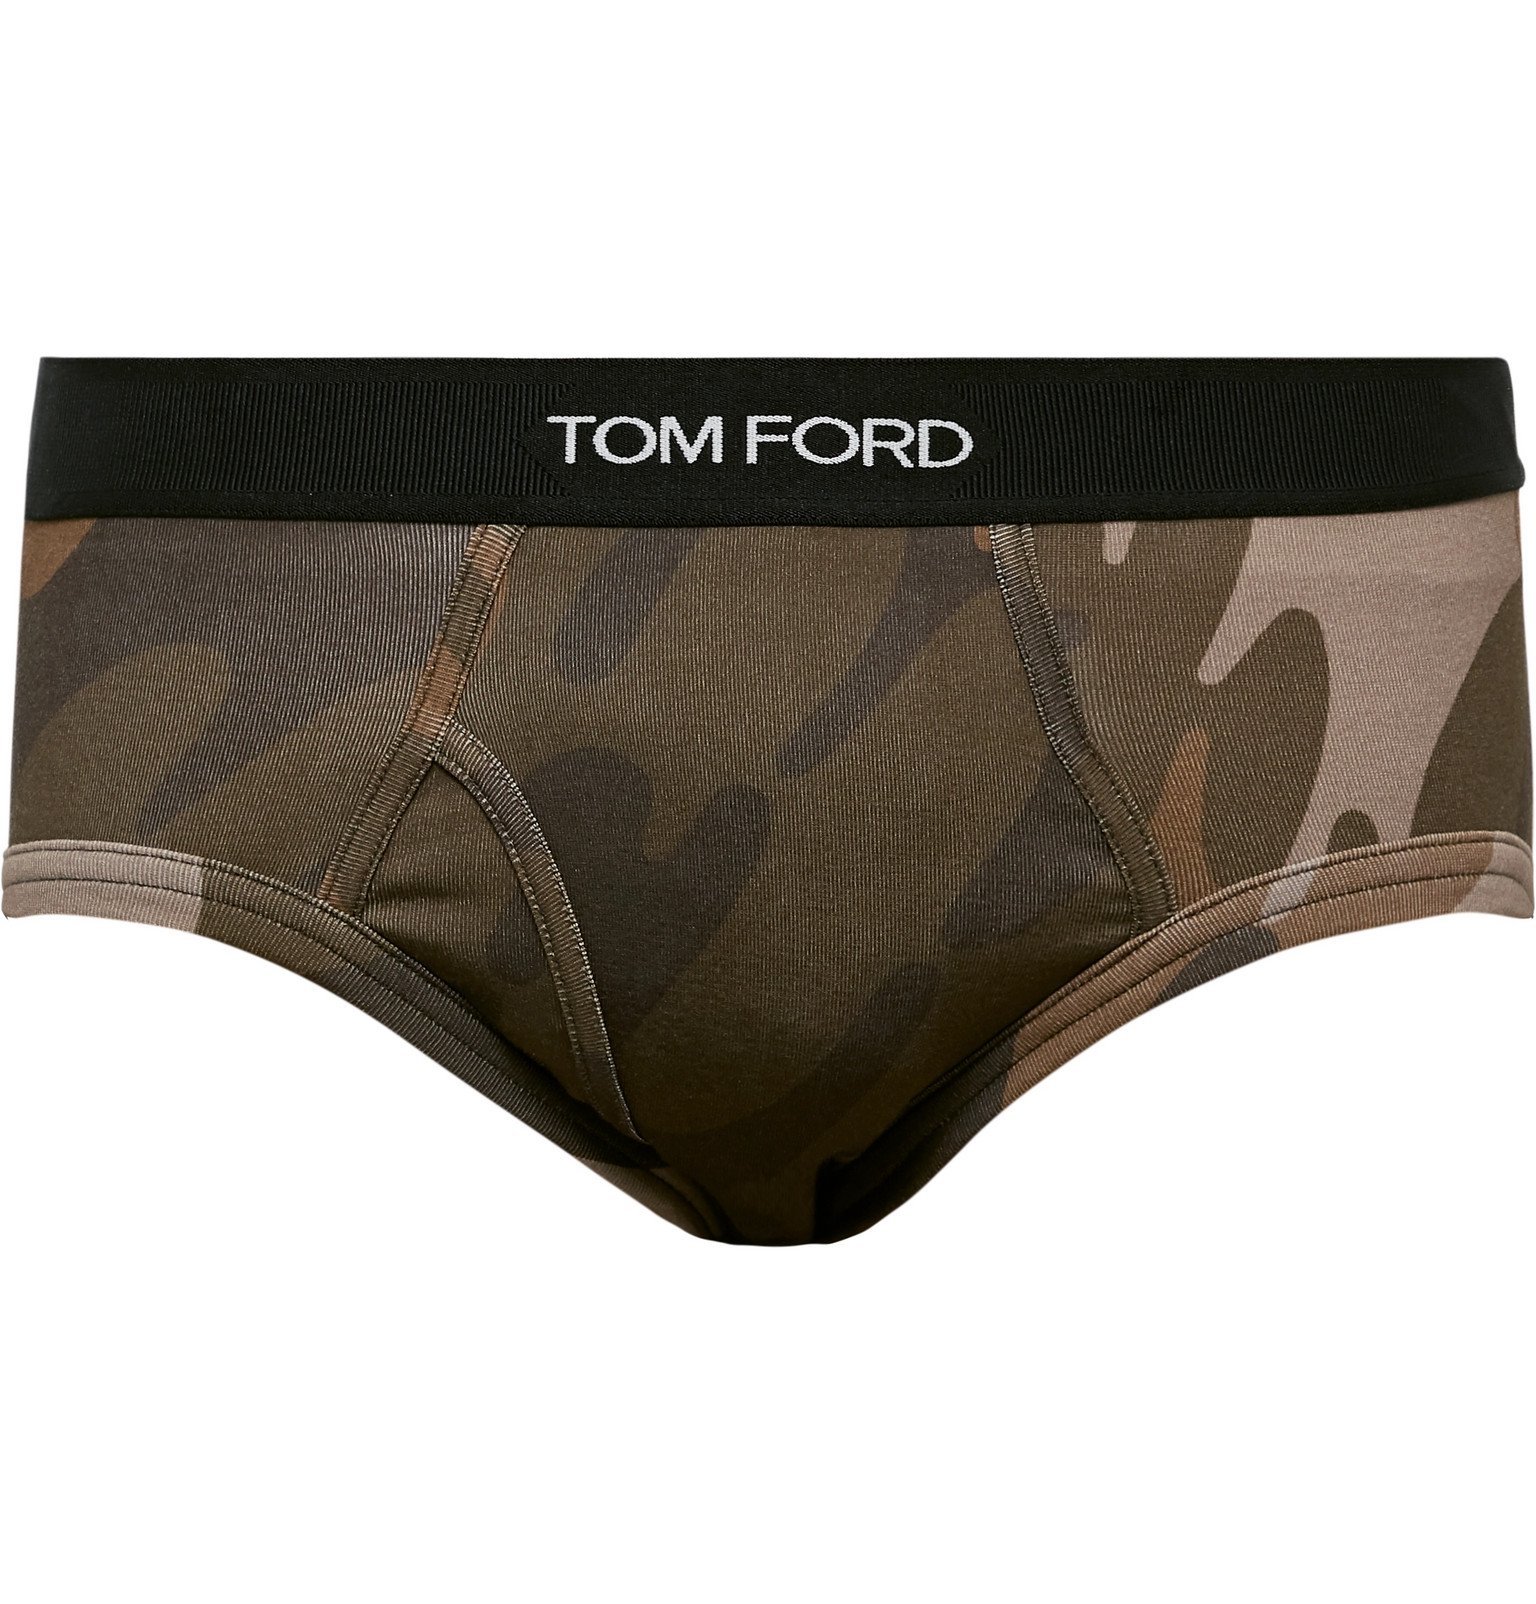 TOM FORD - Camouflage-Print Stretch-Cotton Briefs - Green TOM FORD